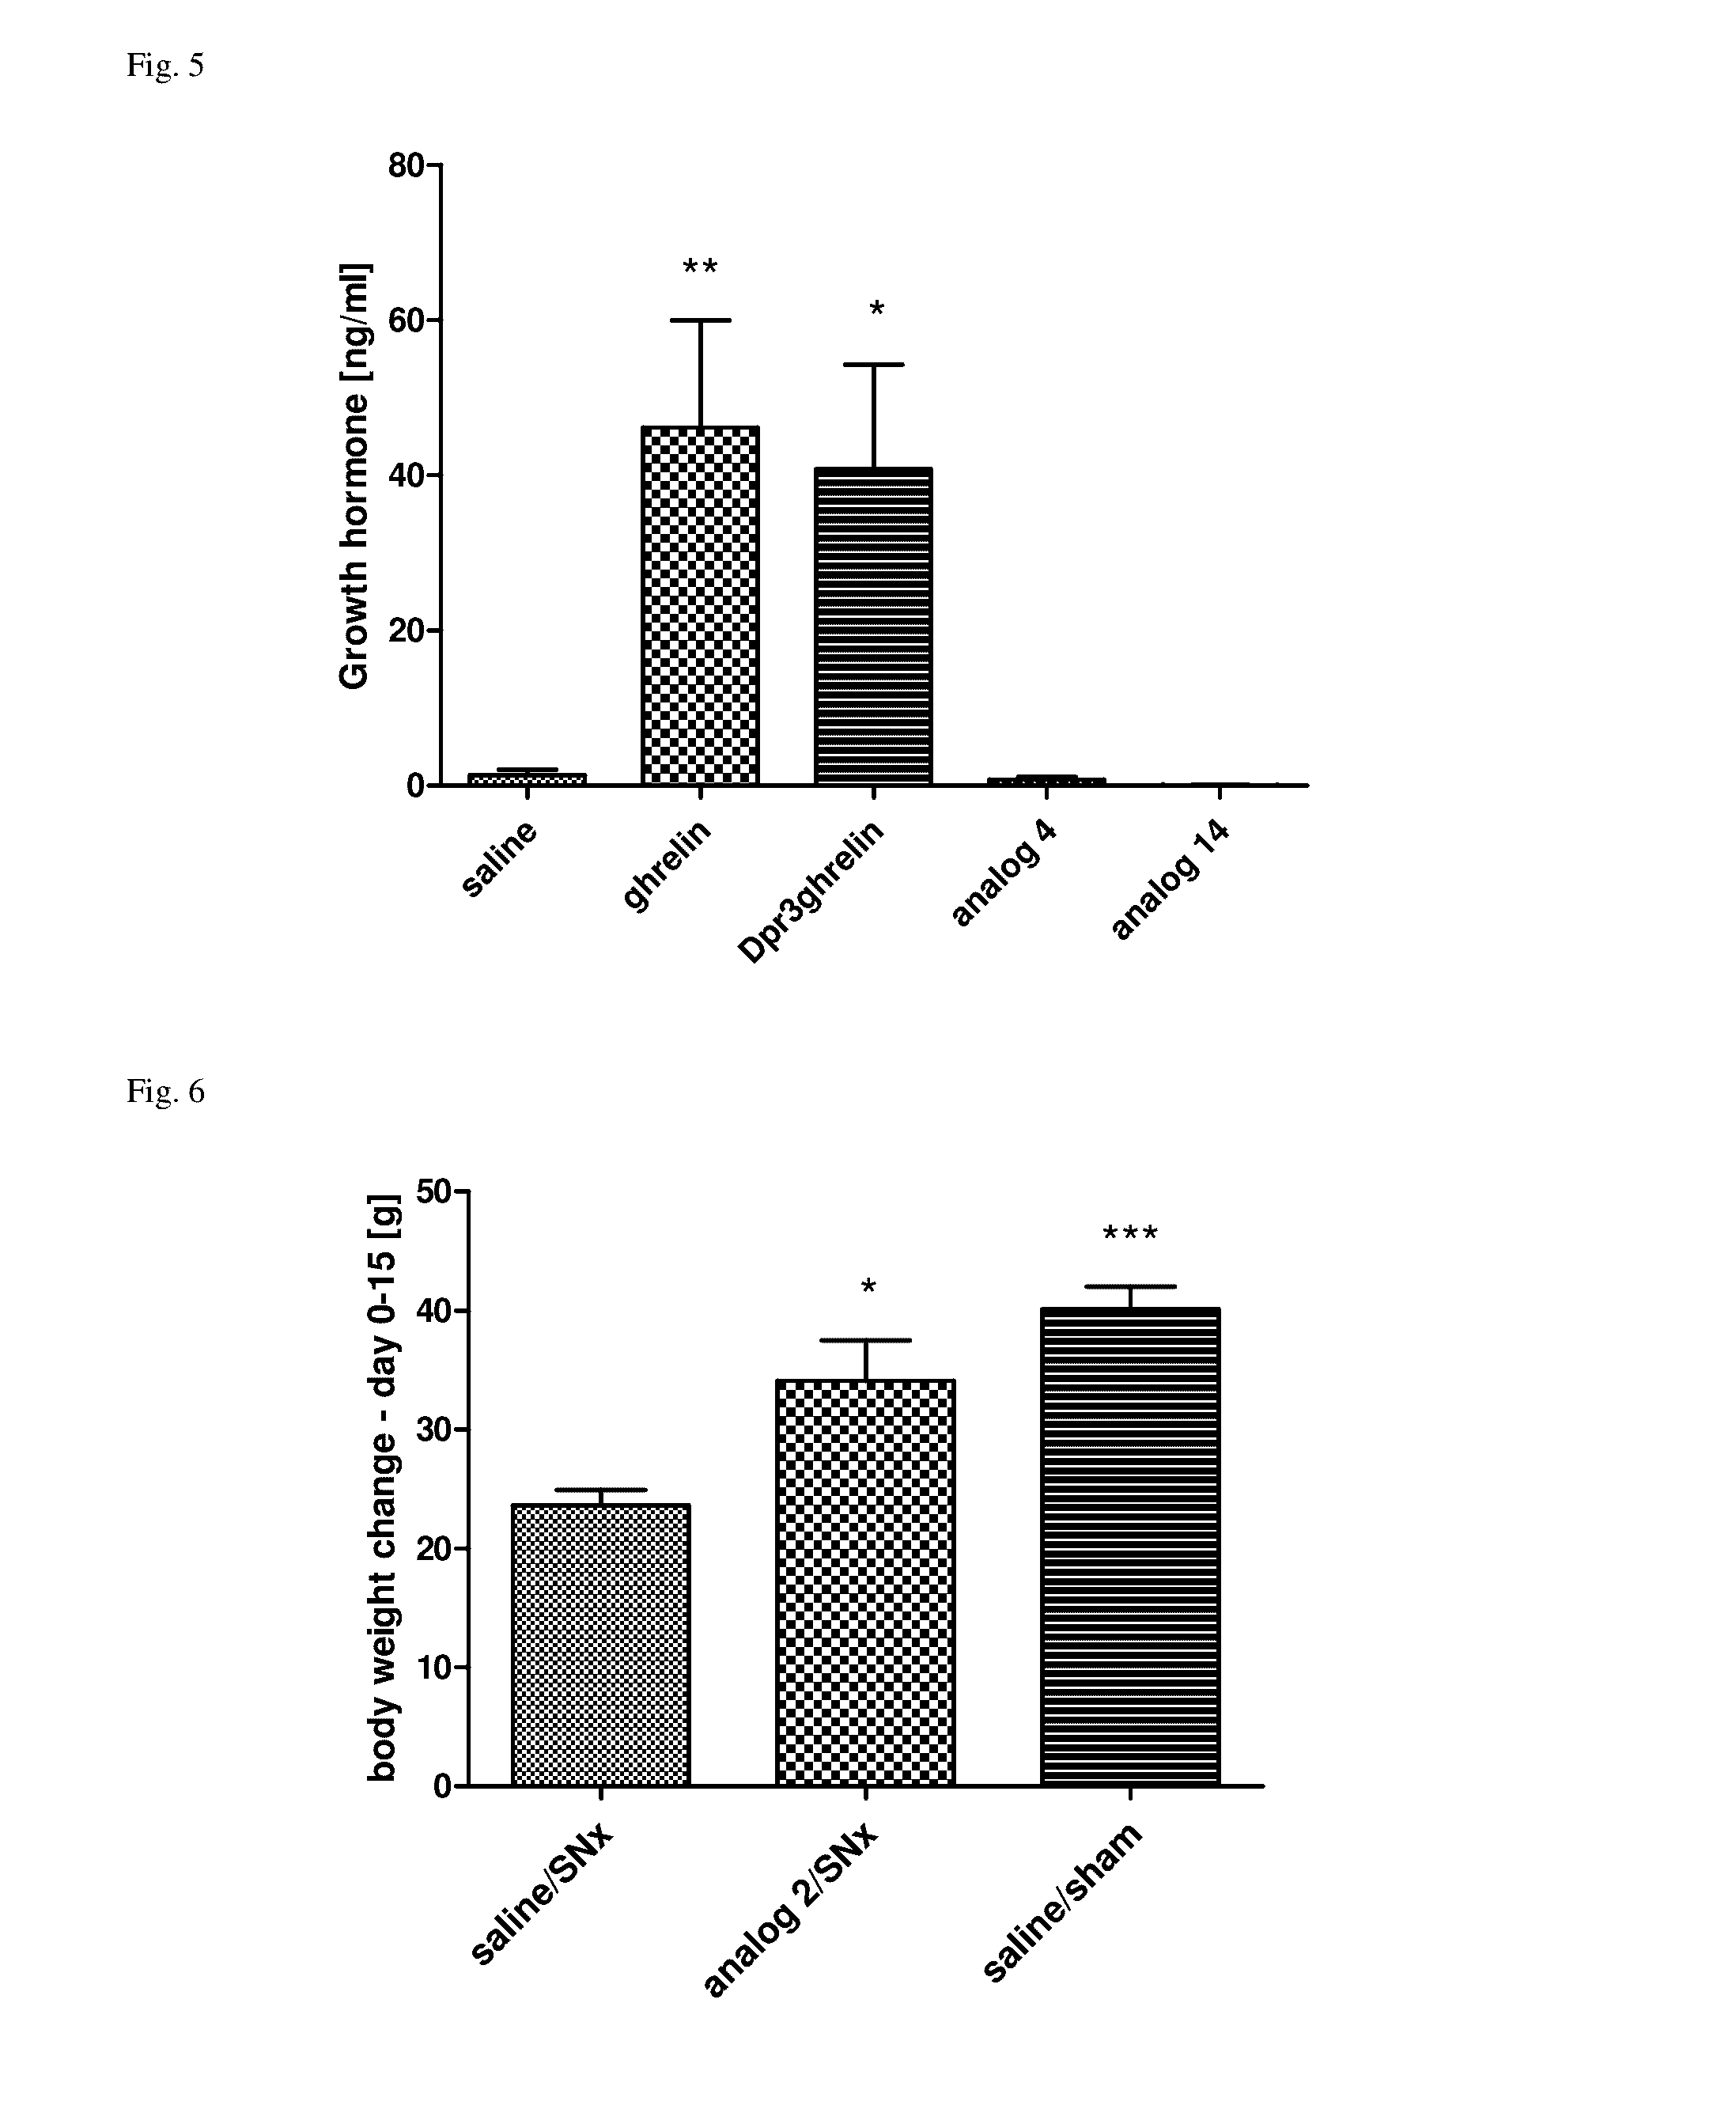 Long-acting stable peptide ghrelin analogs for the treatment of cachexia